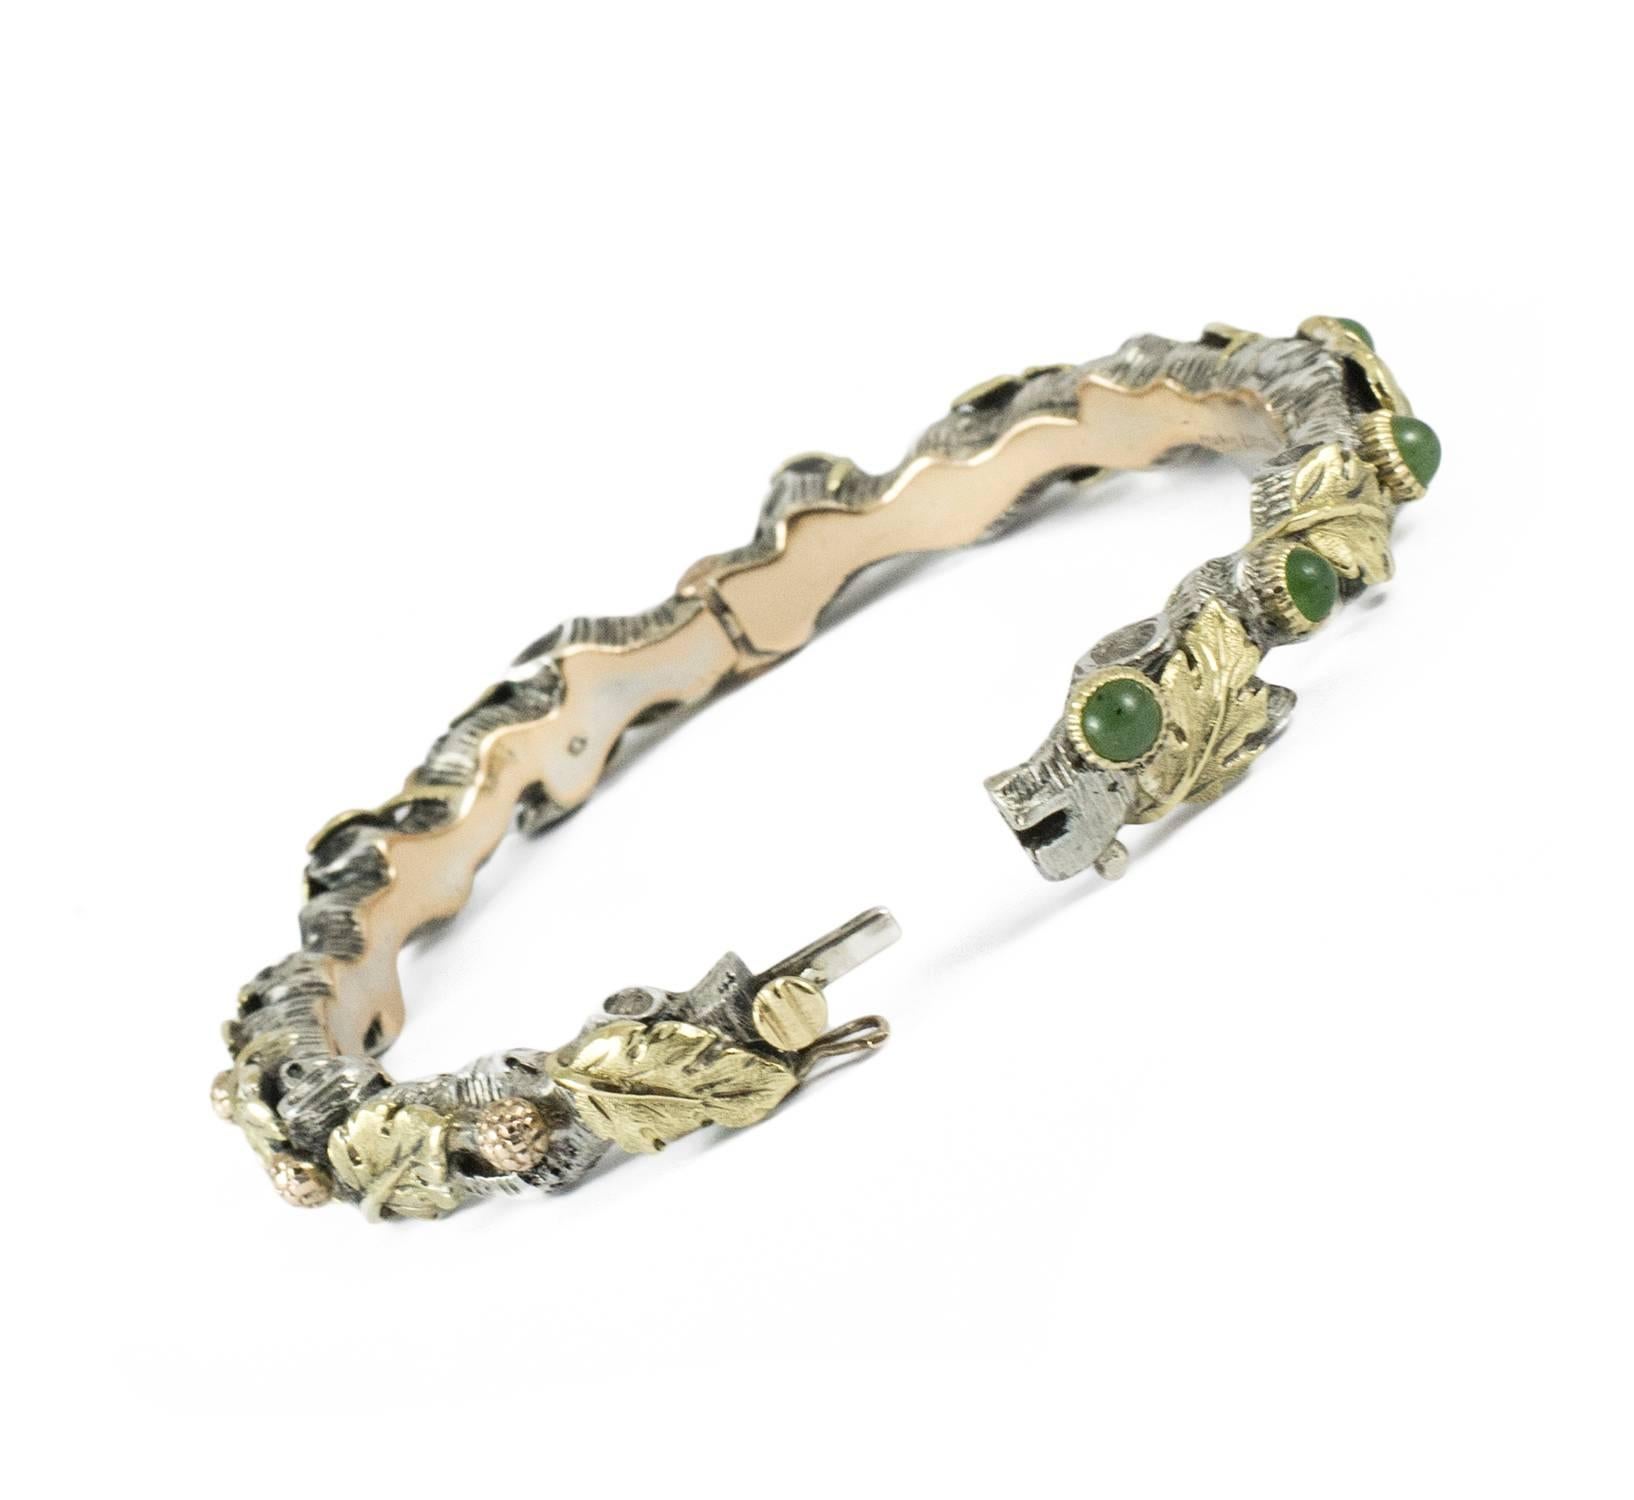 A significant bangle bracelet by Mario Buccellati in yellow gold, rose gold, silver and chalcedony. The bracelet is an example of extraordinary hand crafted workmanship of oak leaves and acorns in gold with the addition of chalcedony detail on a